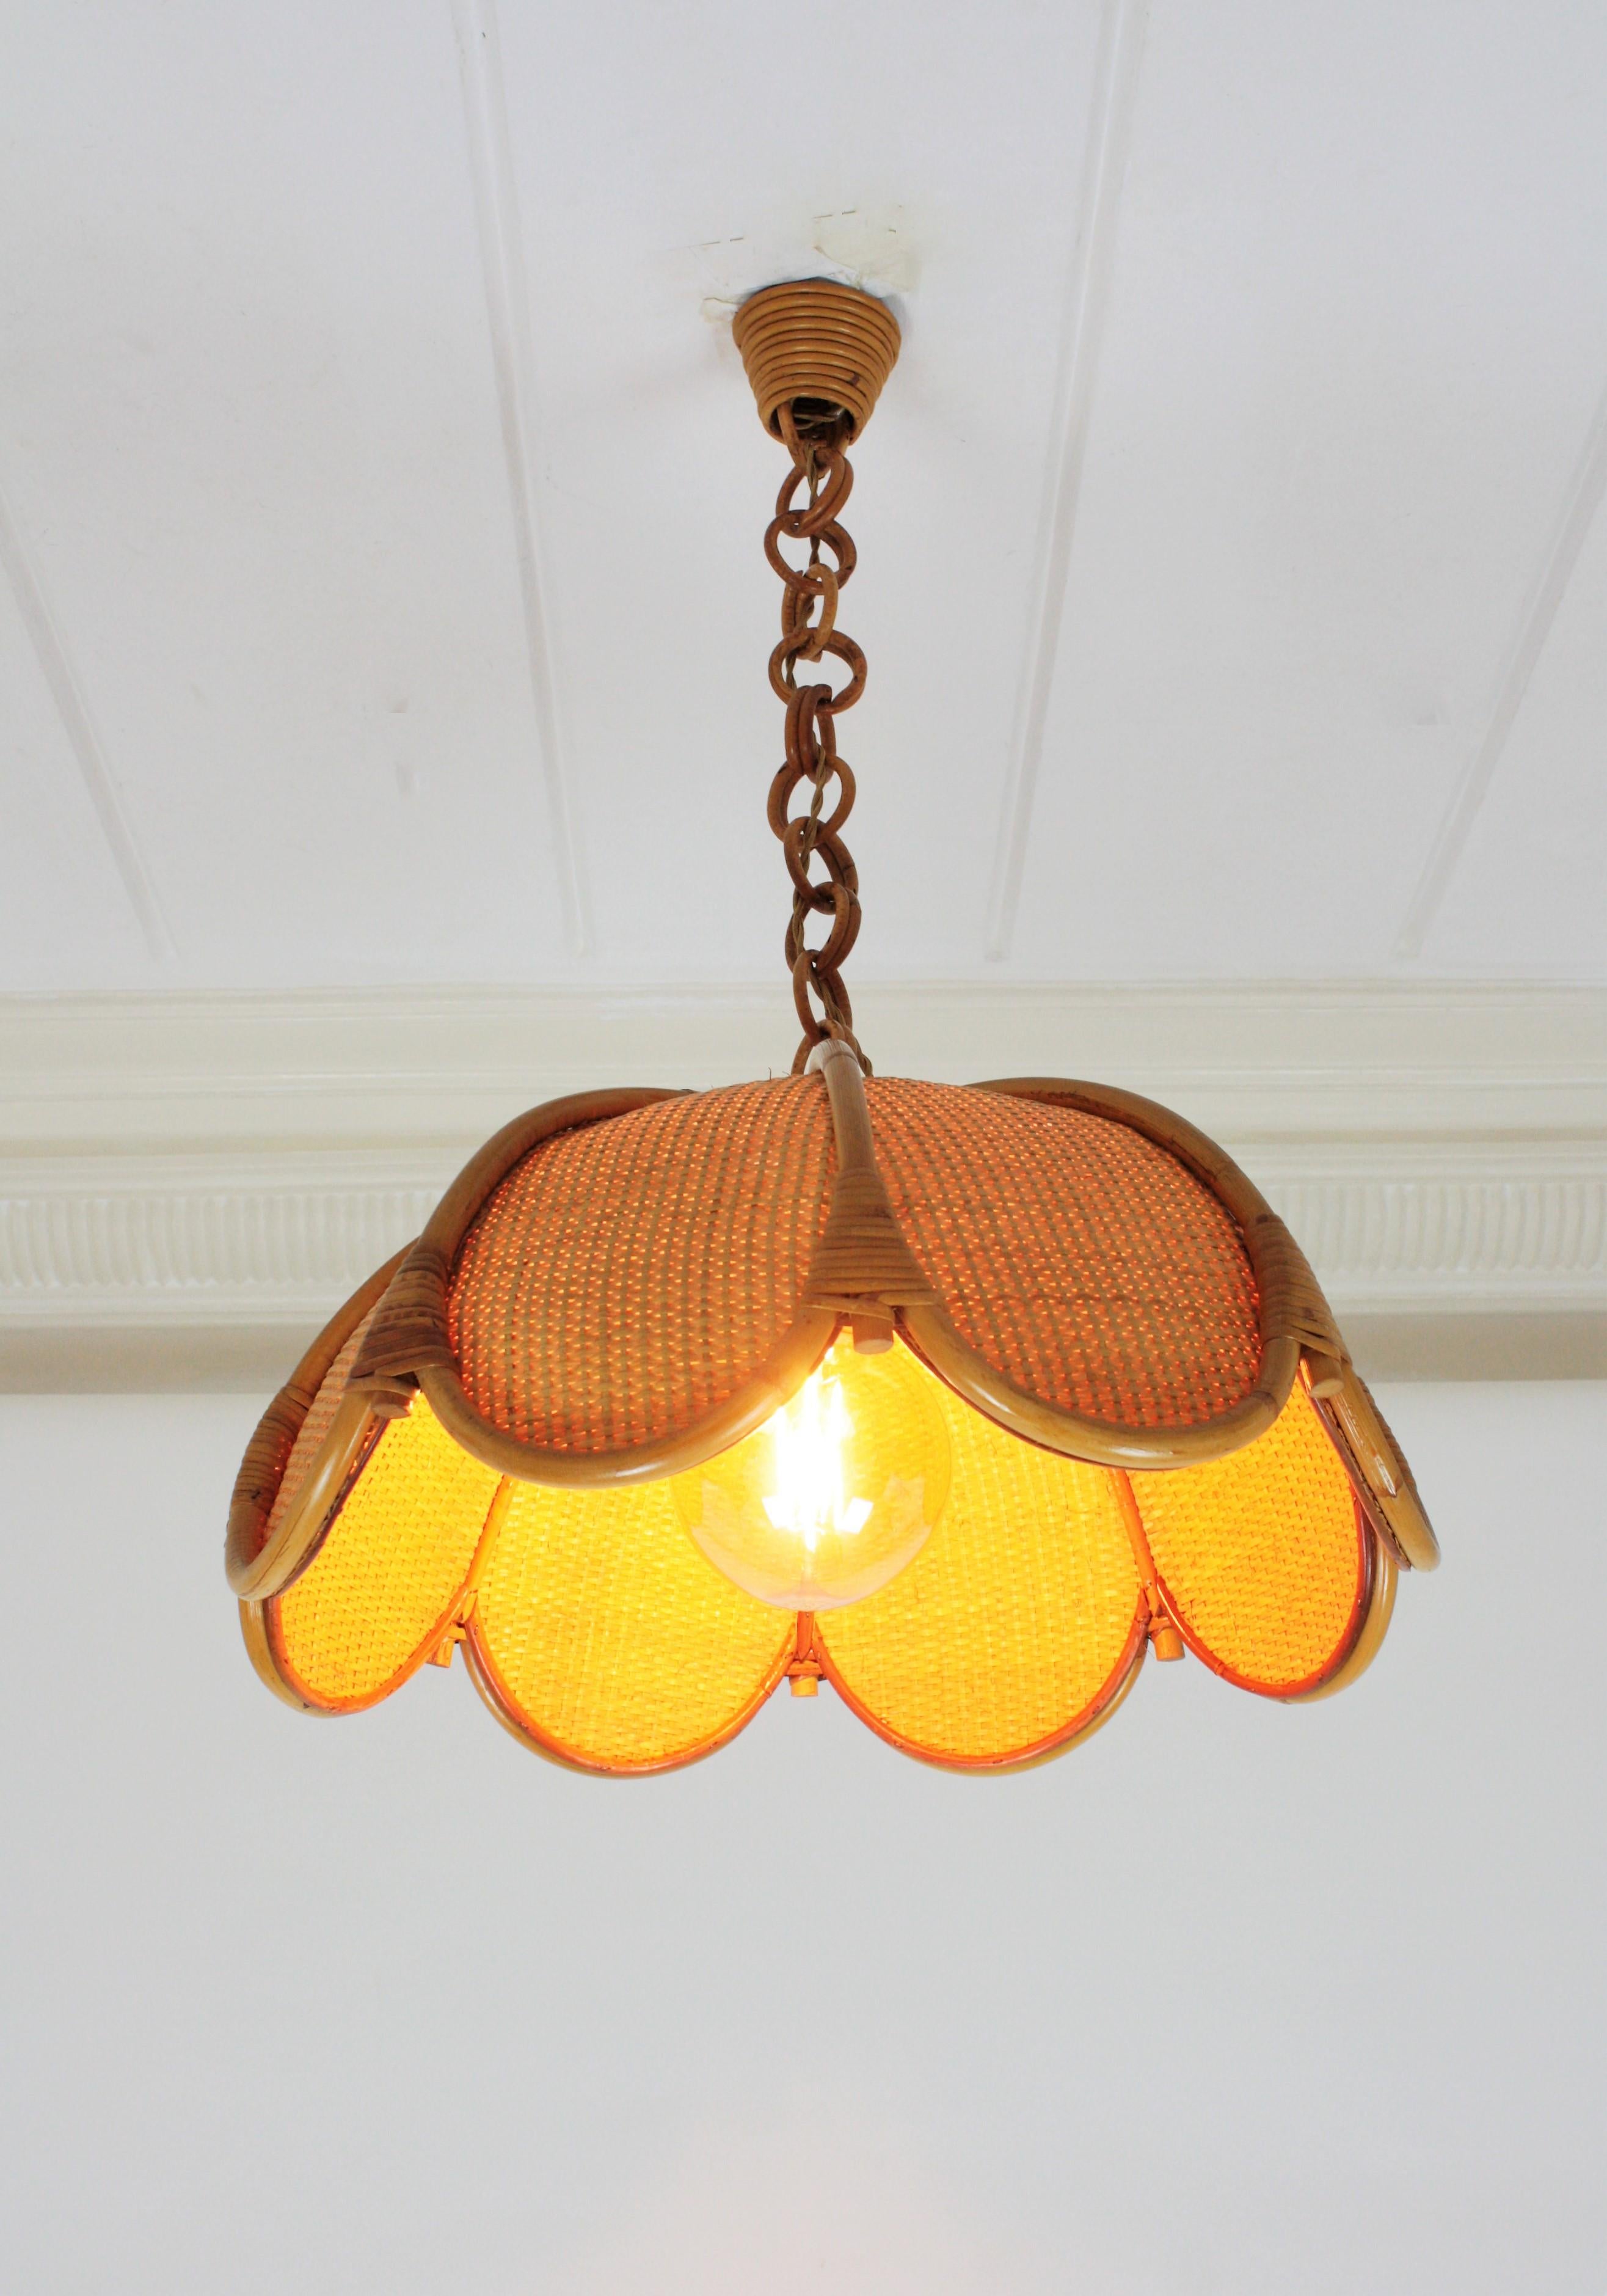 Mid-Century Modern Spanish Modernist Woven Rattan and Bamboo Palm Pendant Lamp / Chandelier, 1960s